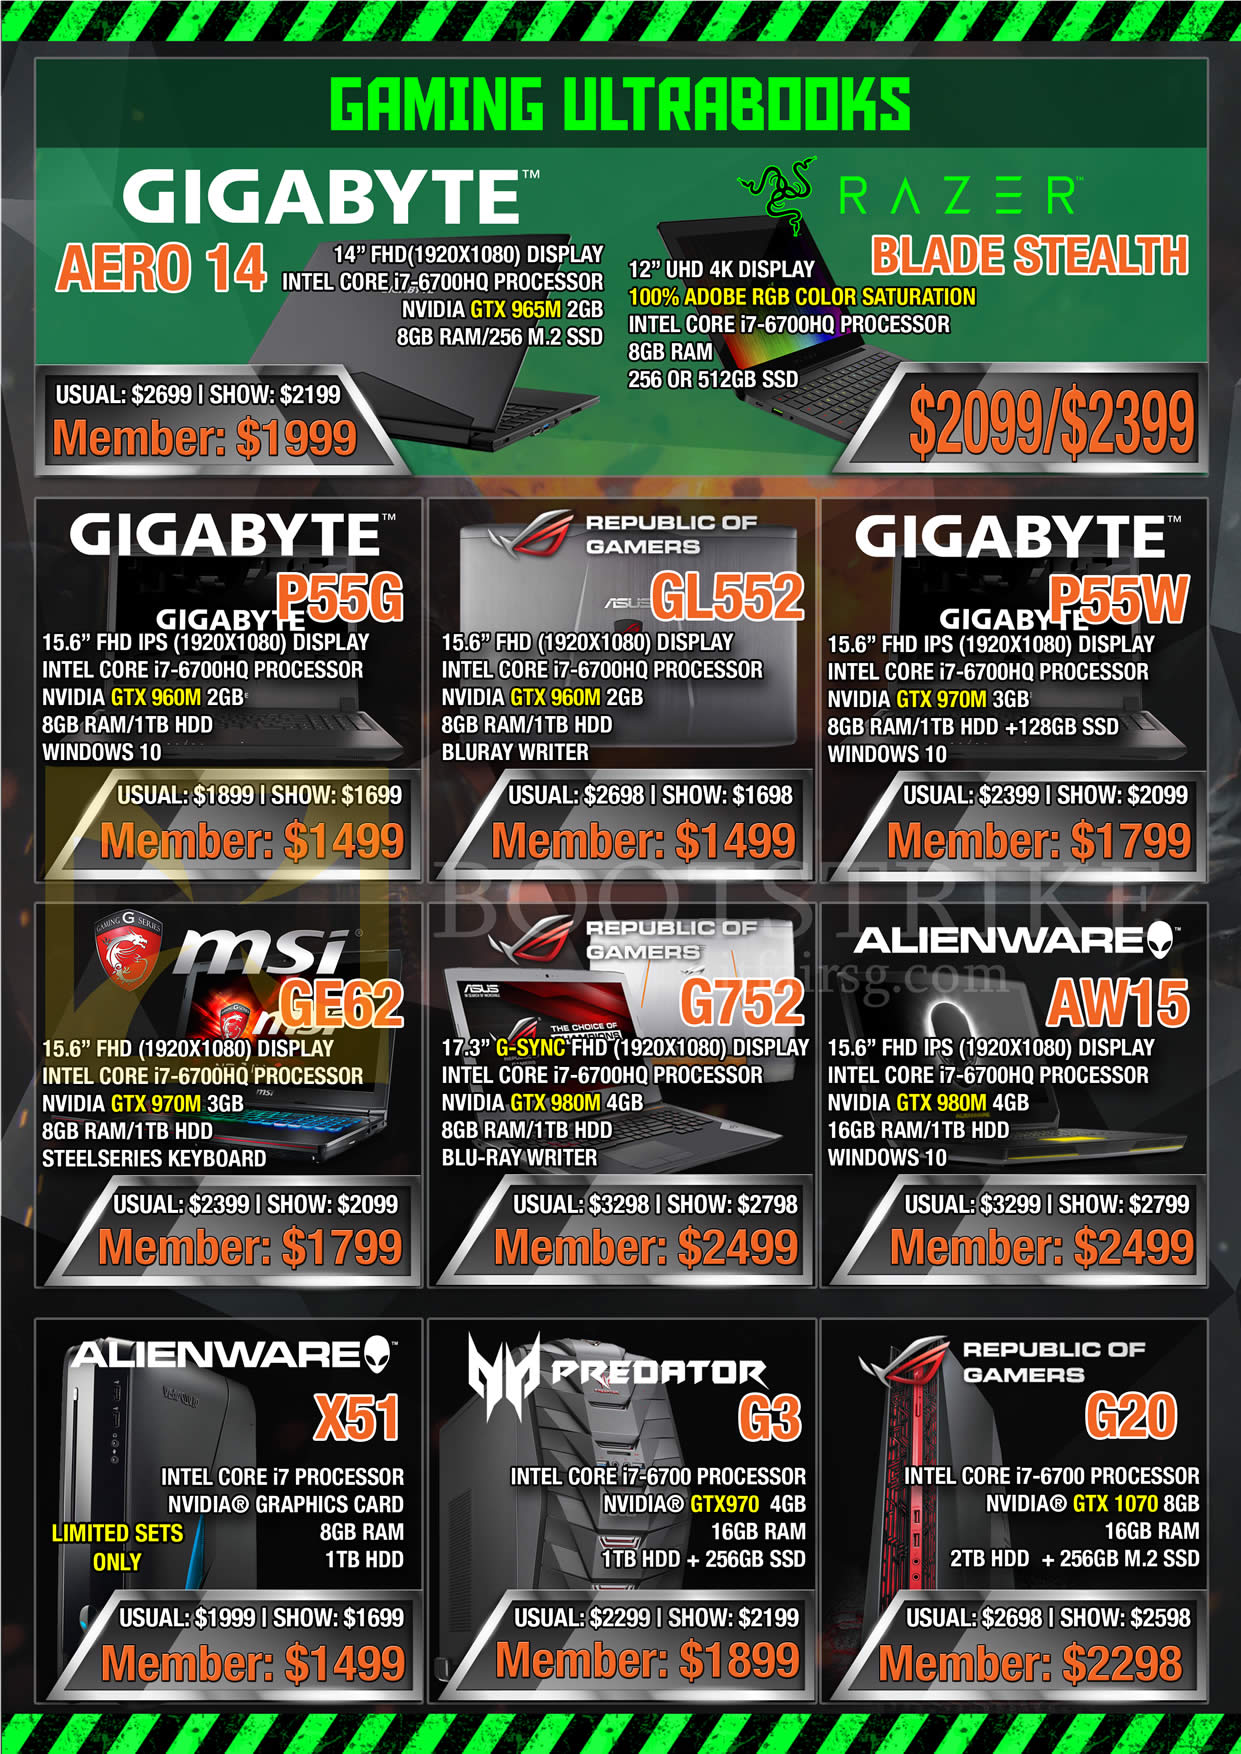 COMEX 2016 price list image brochure of GamePro Notebooks Gigabyte, Republic Of Gamers, Dell, MSI, Aero 14, Blade Stealth, P55G, GL552, P55W, GE62, G752, AW15, X51, G3, G20